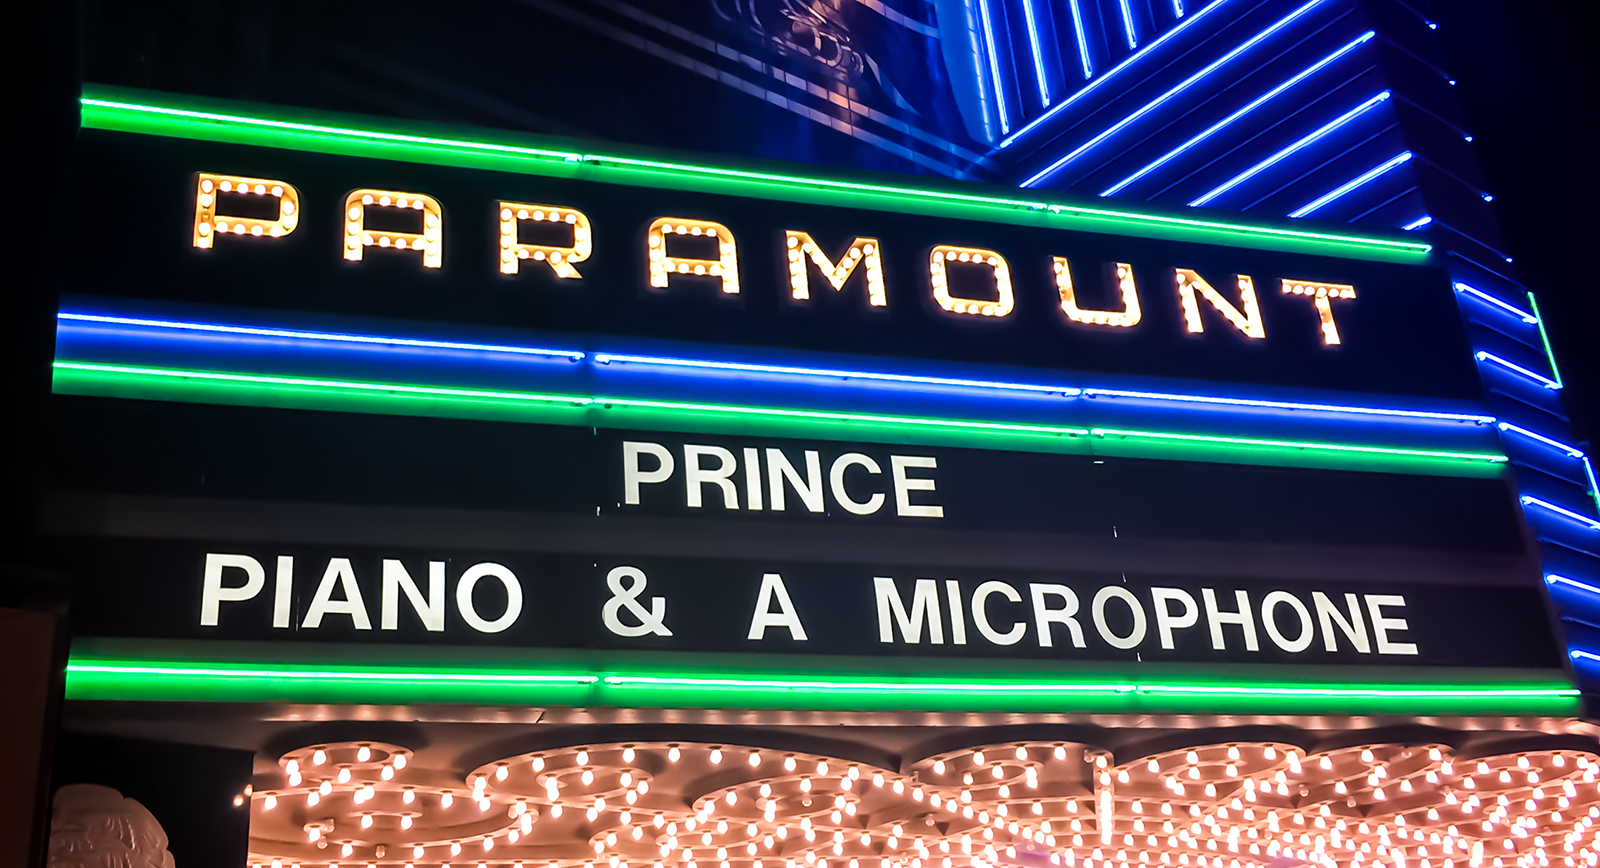 Prince-Piano-and-a-Microphone-2016-Concert-Tour-Paramount-Theatre-Oakland-Concert-Review-FI